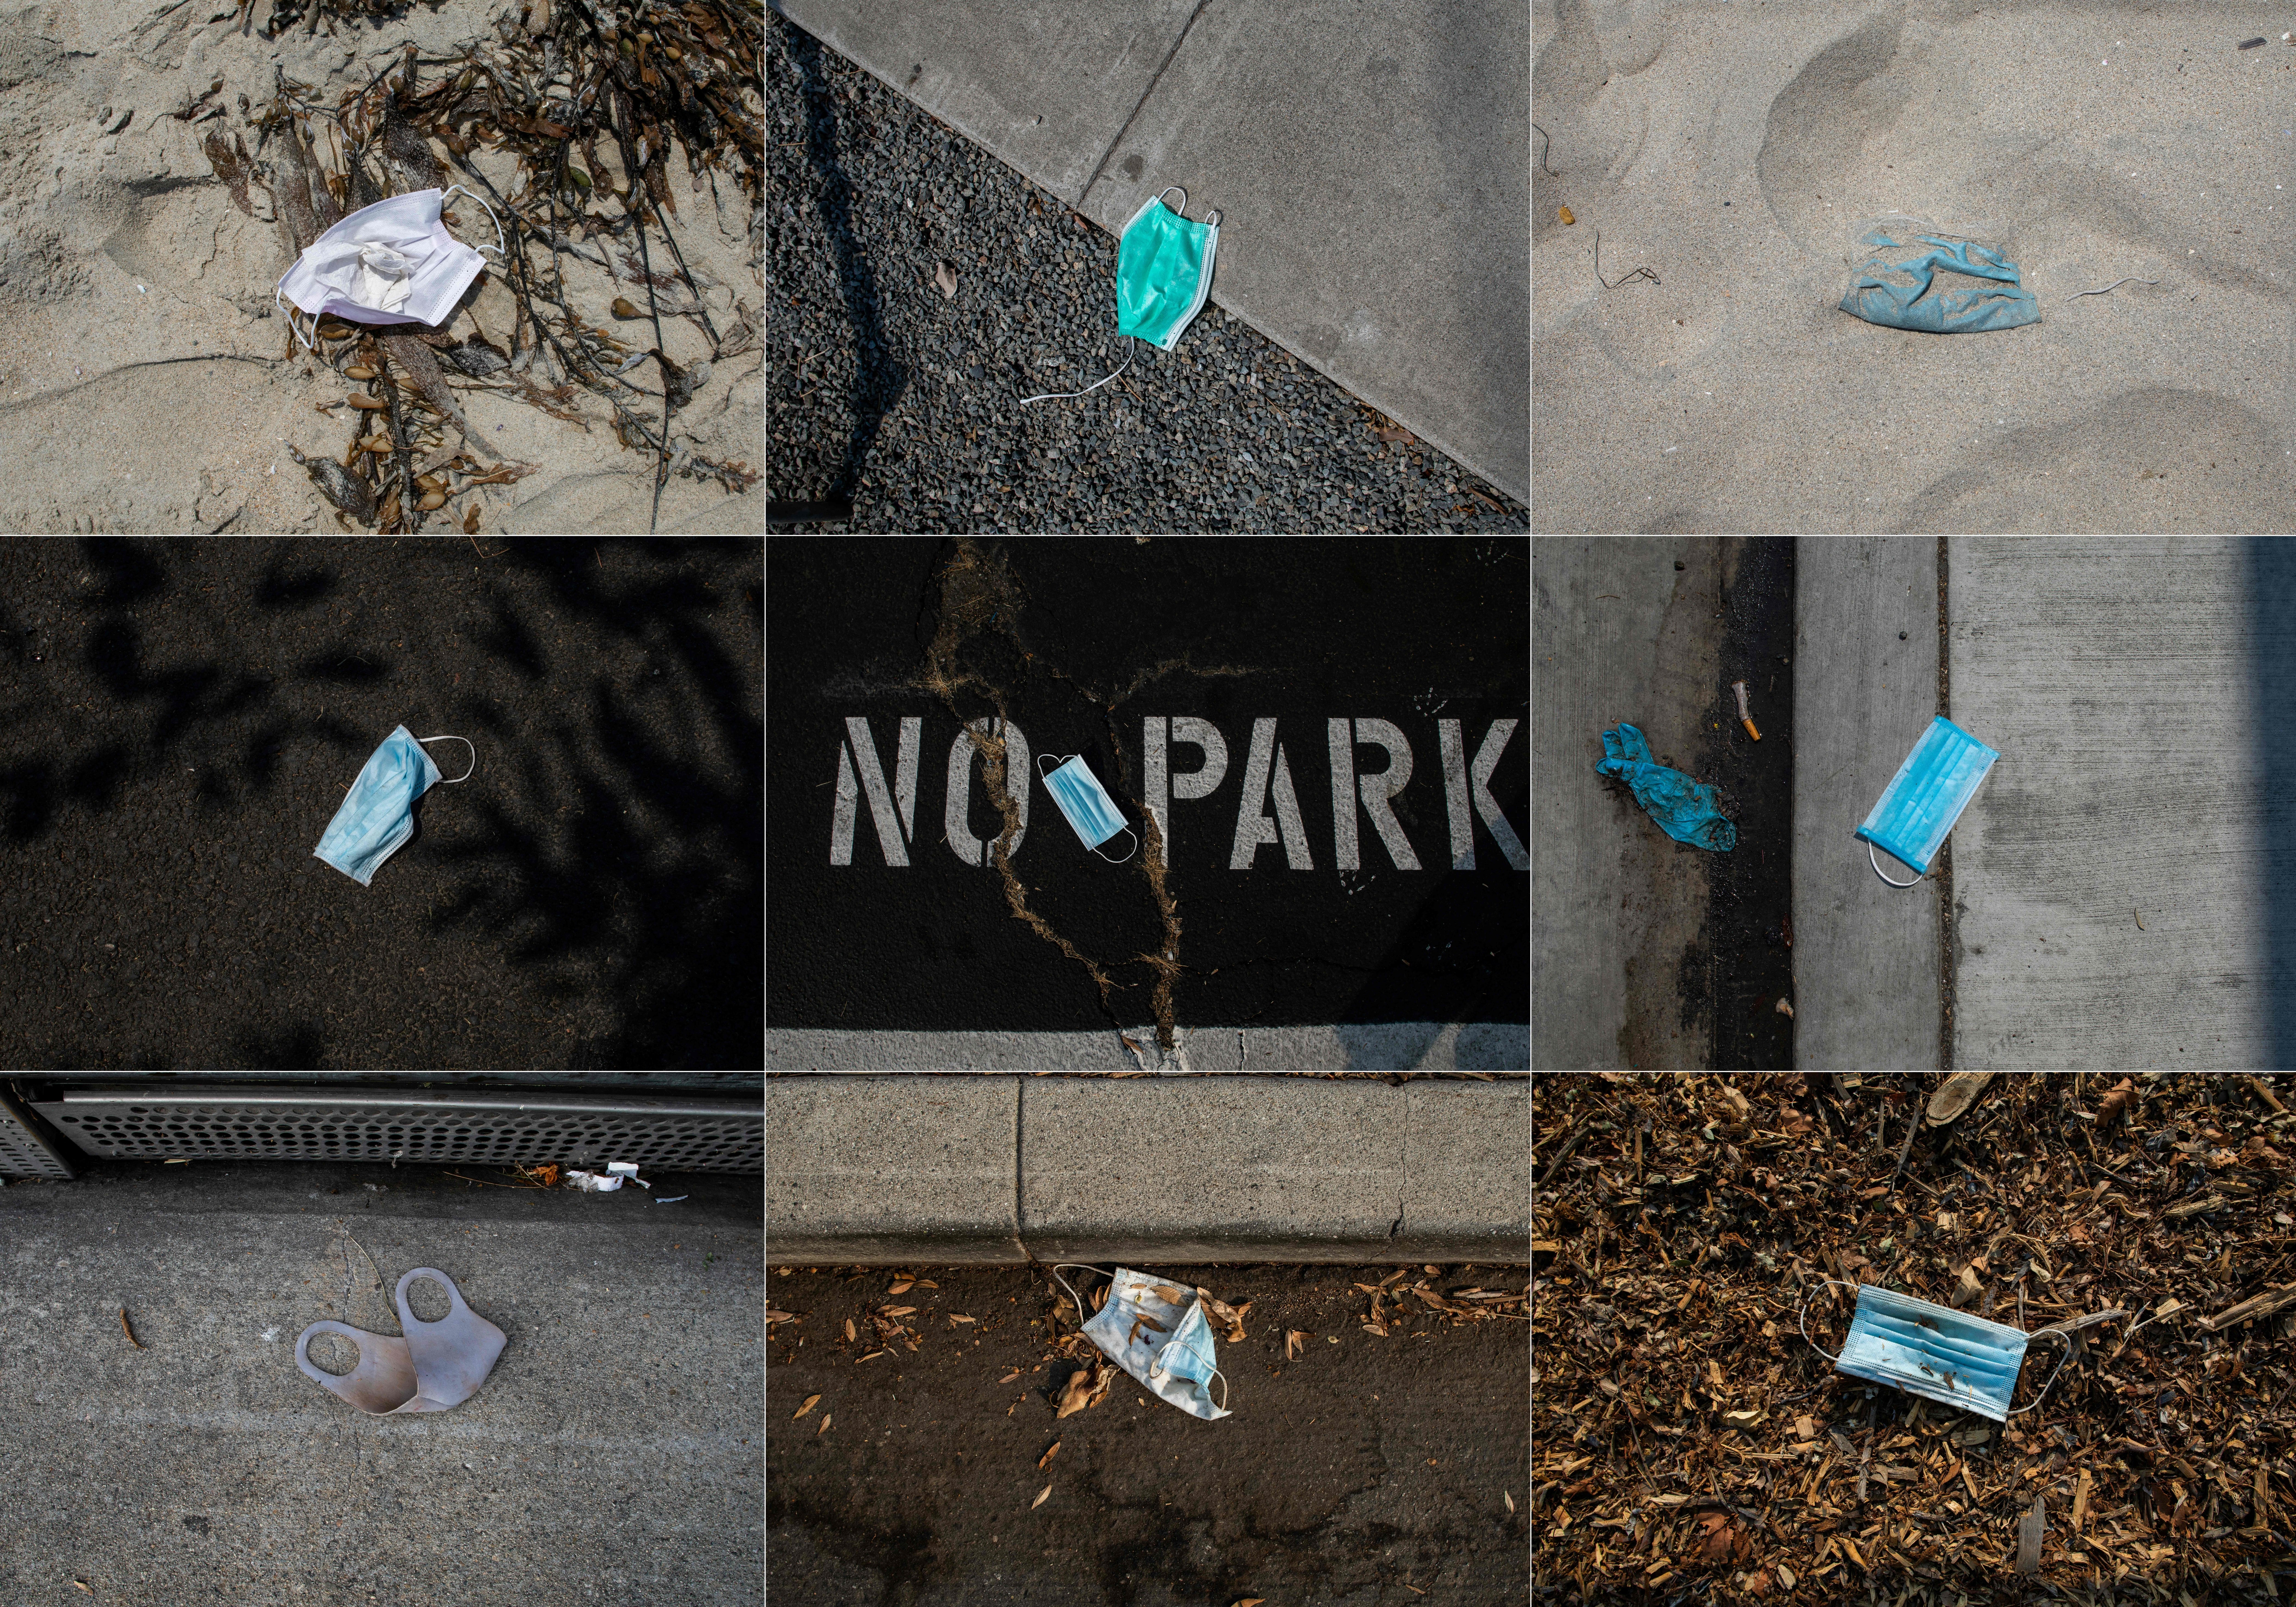 A collection of photographs showing discarded single-use masks in California